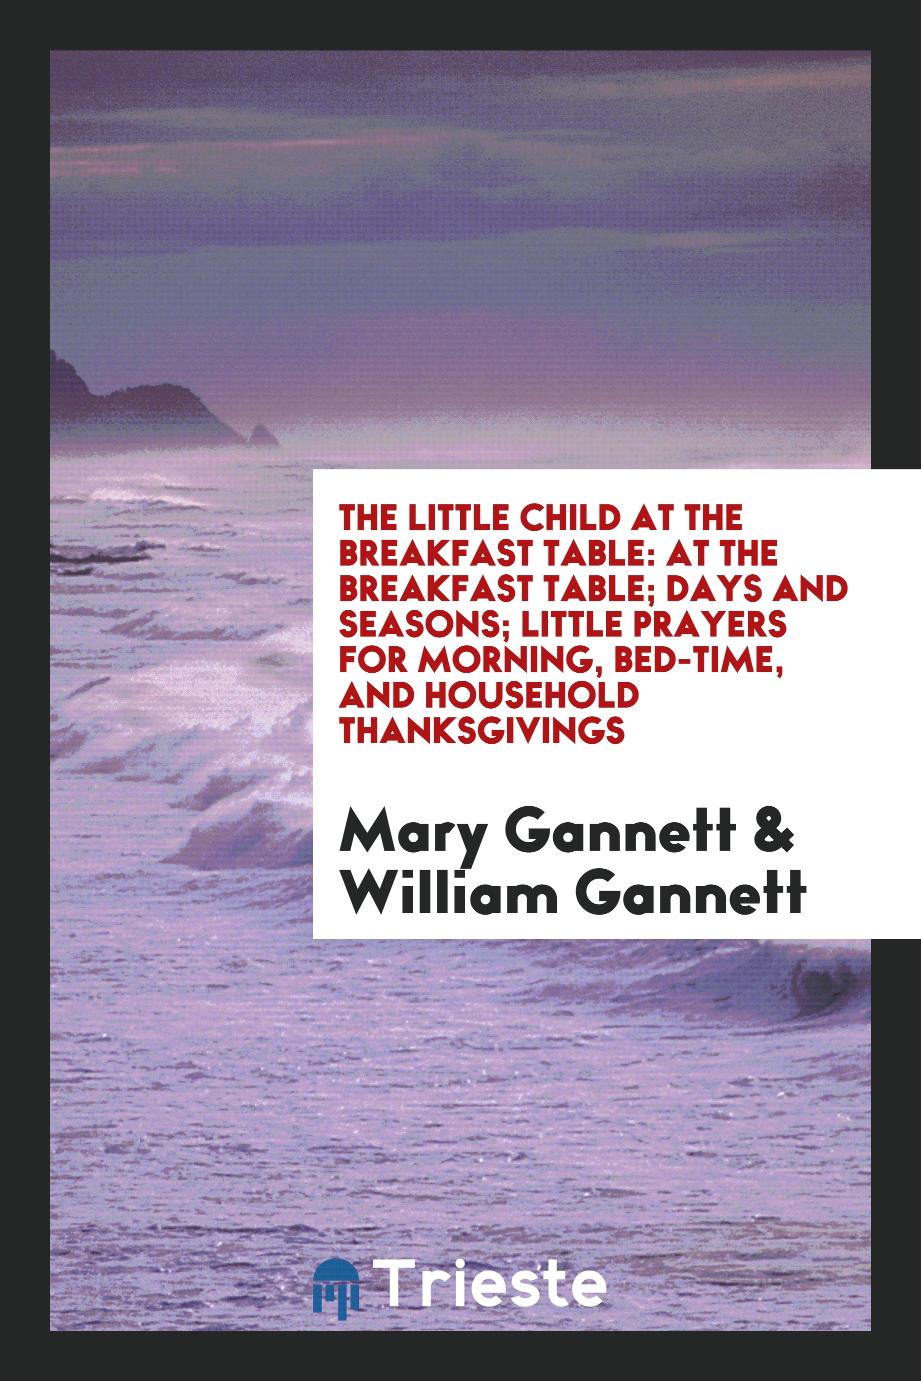 The Little Child at the Breakfast Table: At the Breakfast Table; Days and Seasons; Little prayers for morning, bed-time, and household thanksgivings